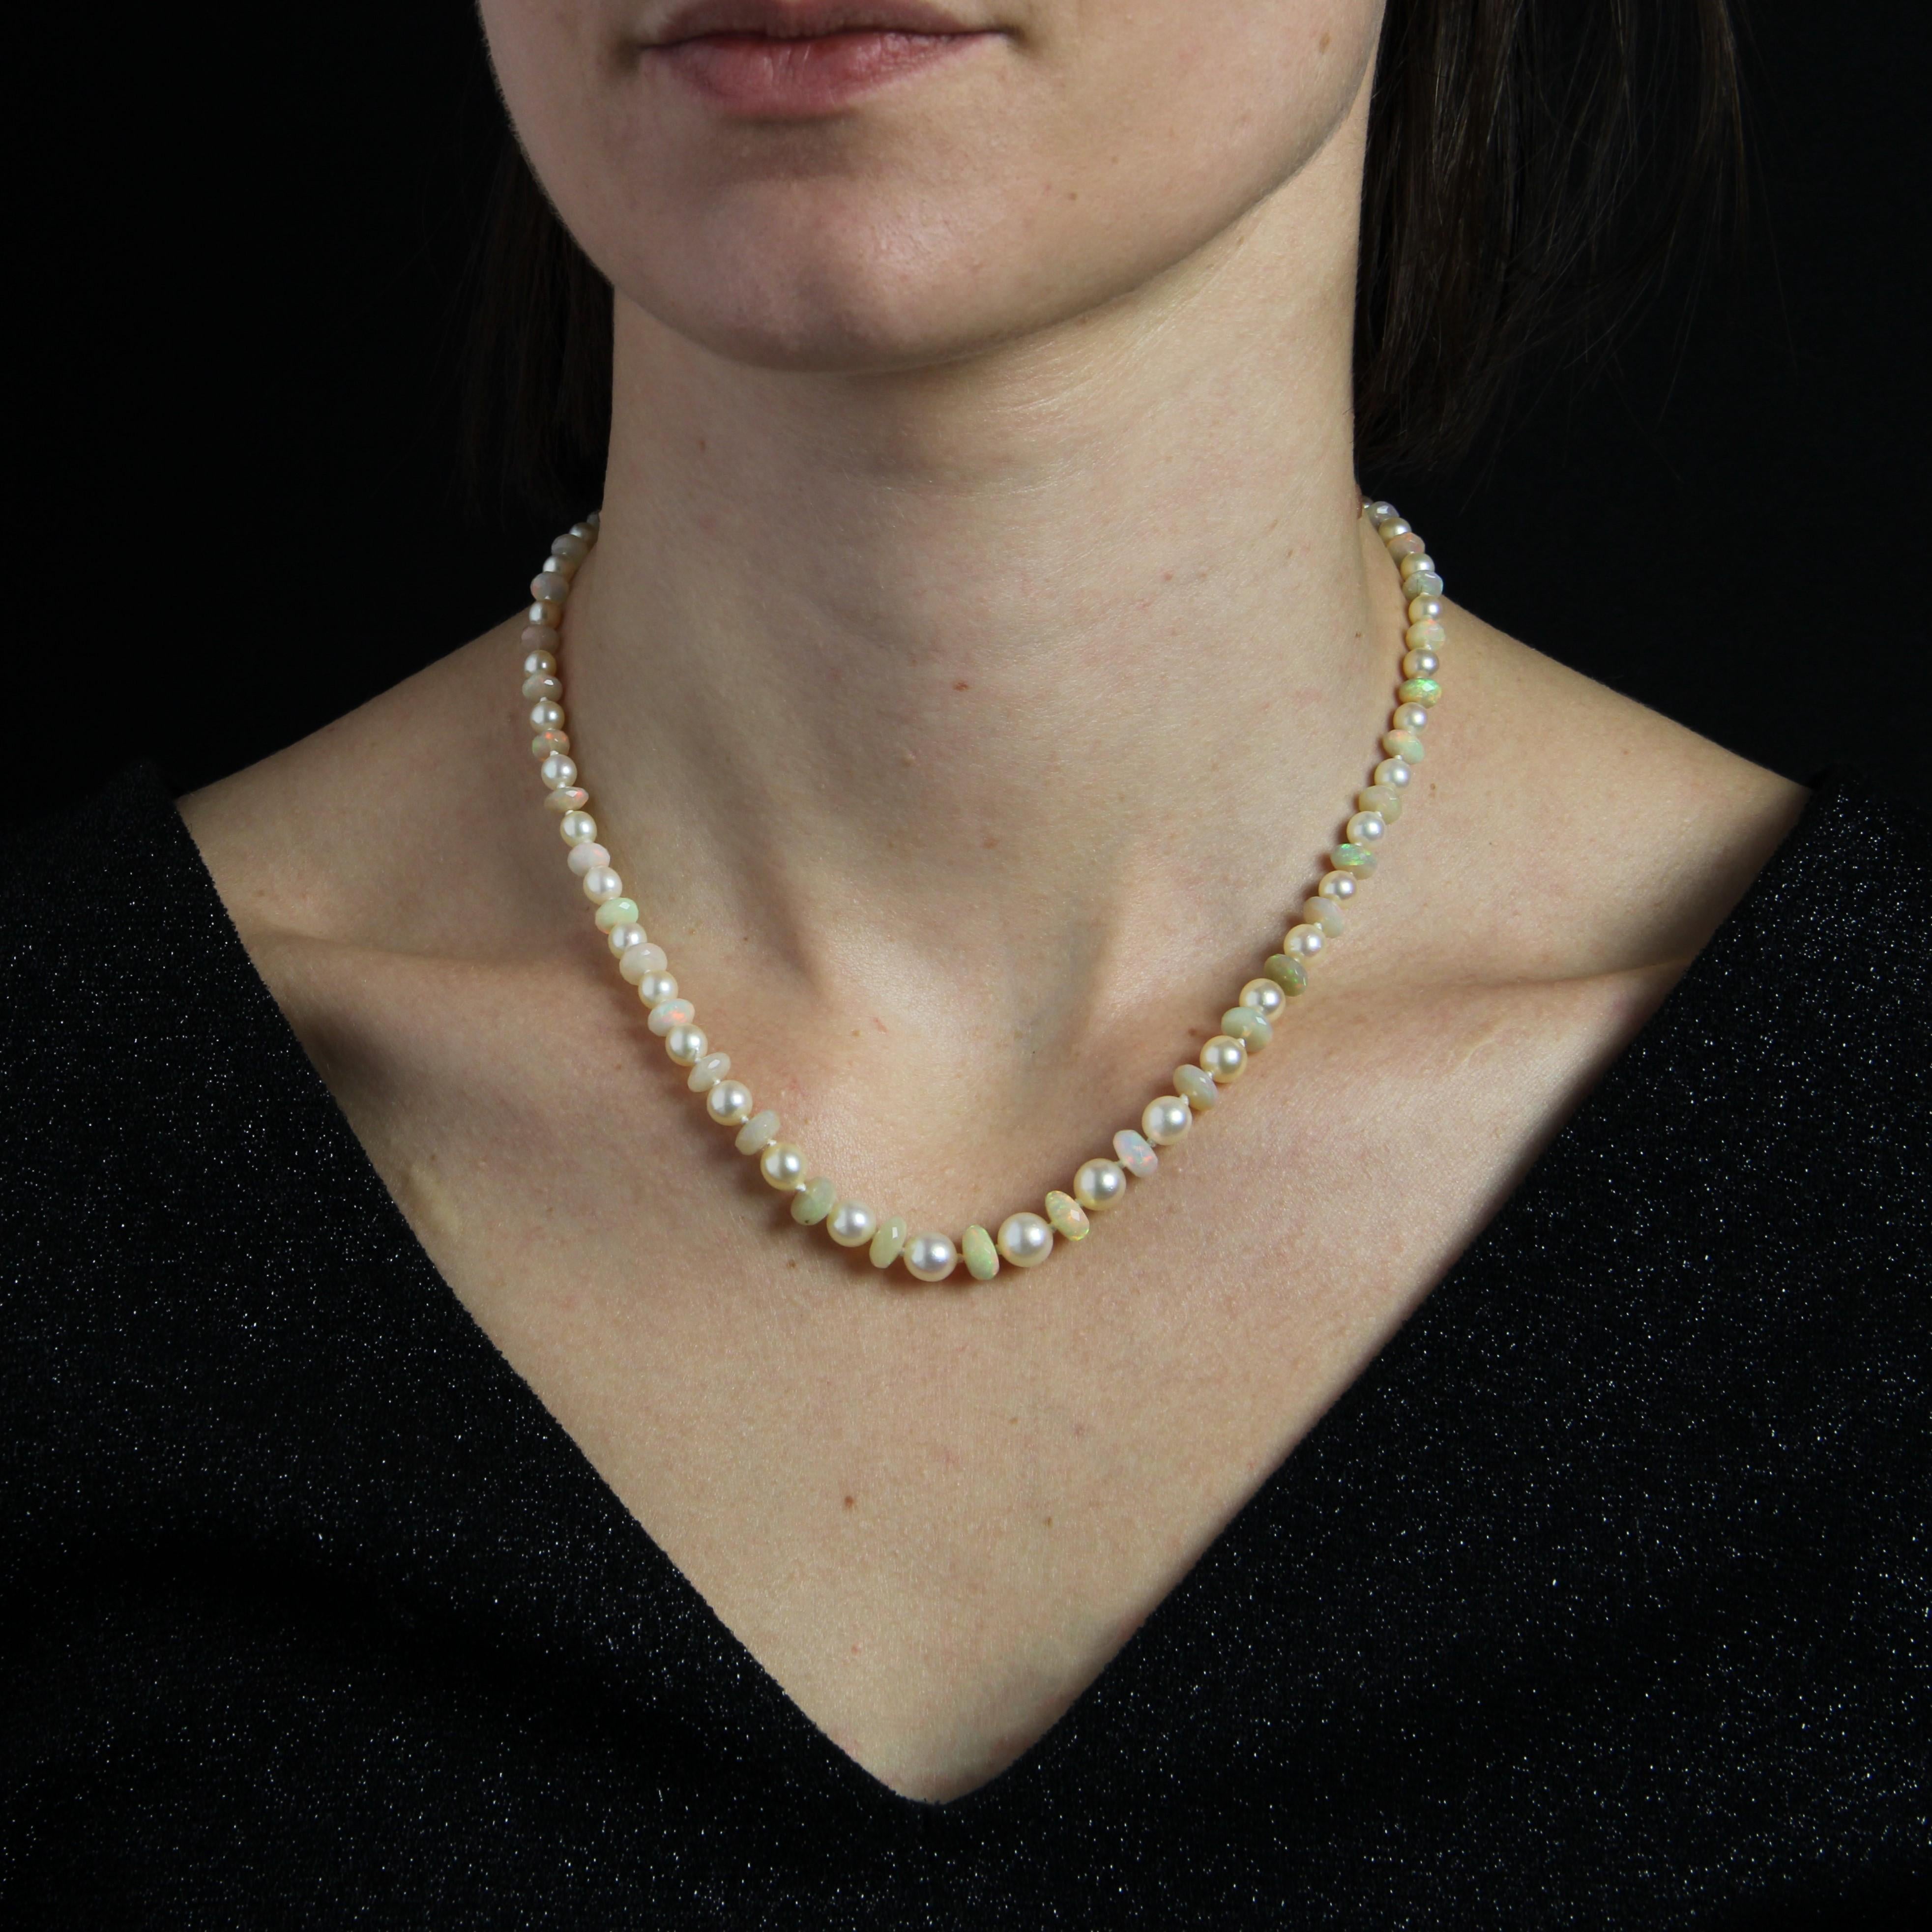 Baume Creation.
Necklace of pearly white oriental cultured pearls, separated by flat, faceted opal beads. The clasp is in 18 Karat white gold, eagle-head hallmark, ratchet with safety chain. It is rectangular with cut sides and set with rose-cut